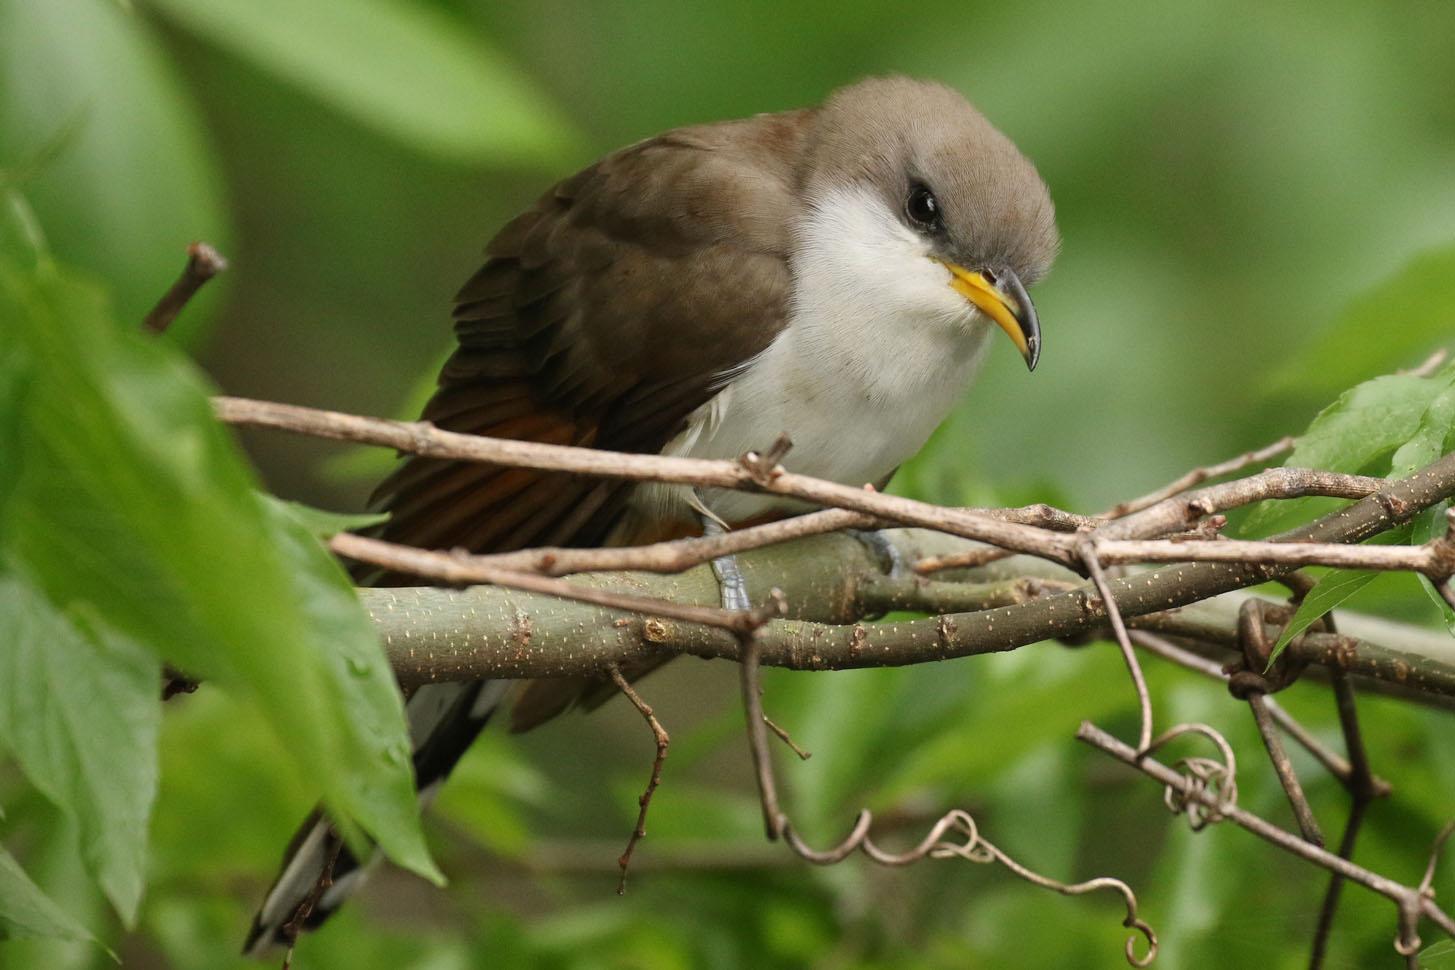 Yellow-billed Cuckoo Photo by Kristy Baker